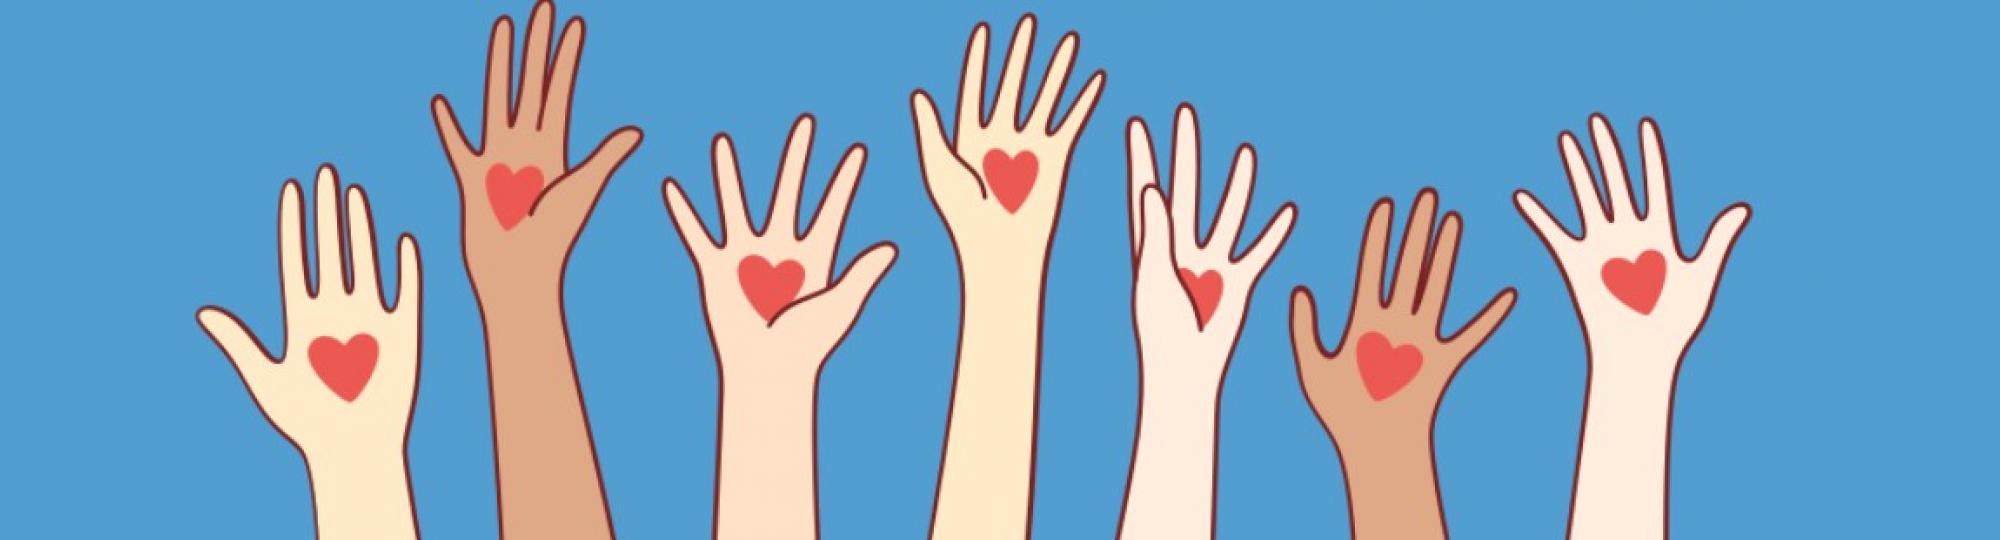 Graphic if hands raised with hearts in the palms